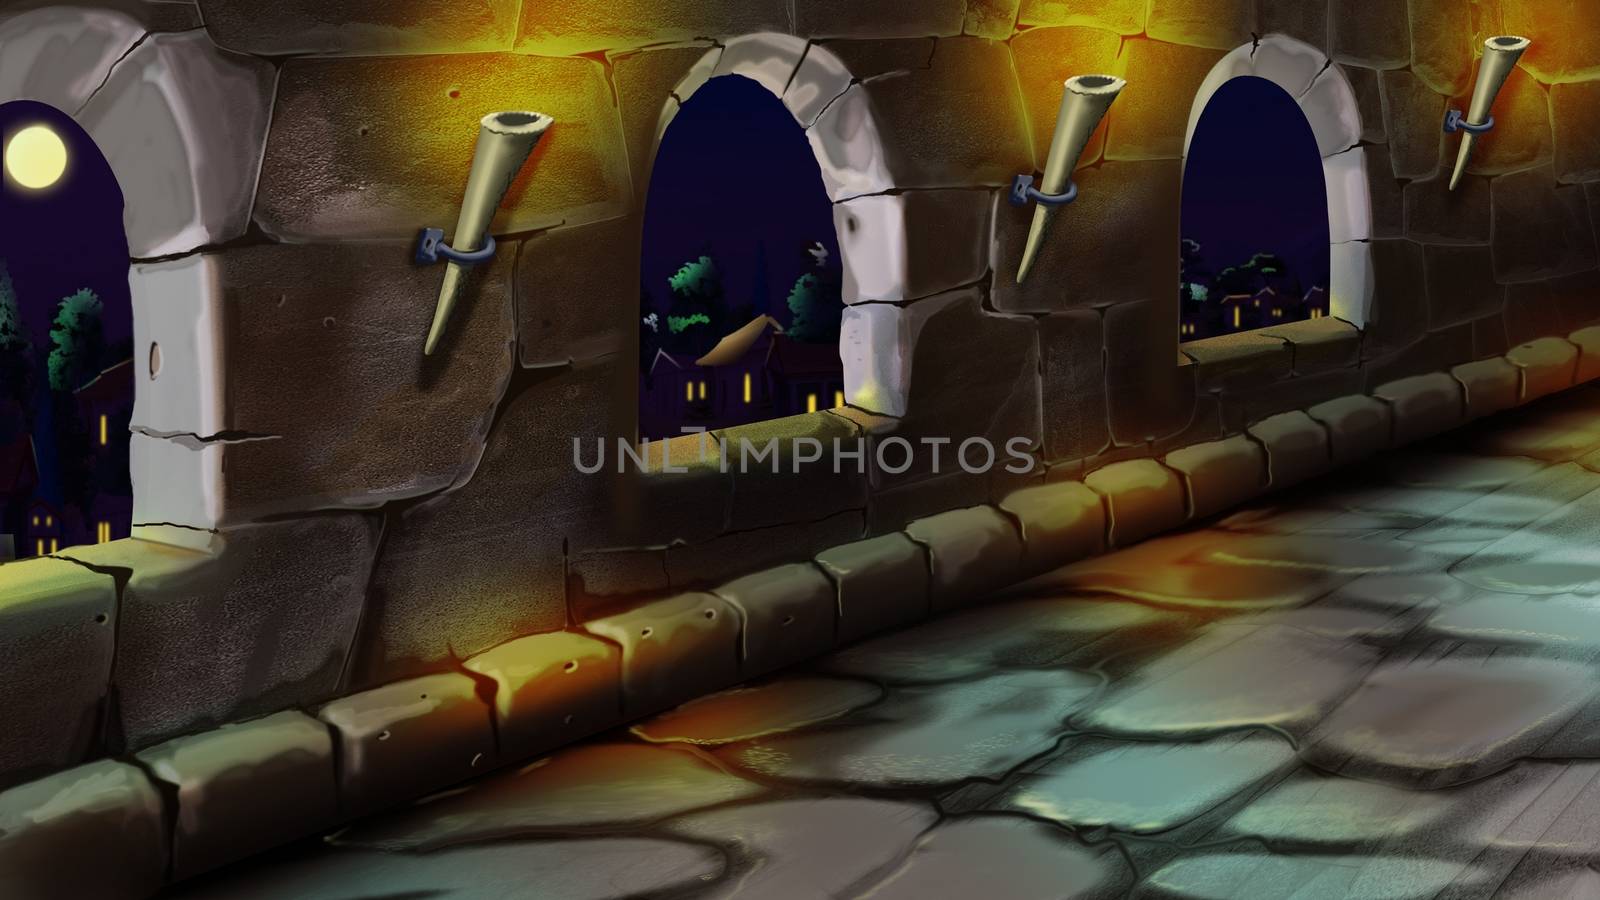 Digital painting of gallery in the. Summer night view with a stone floor and torches.